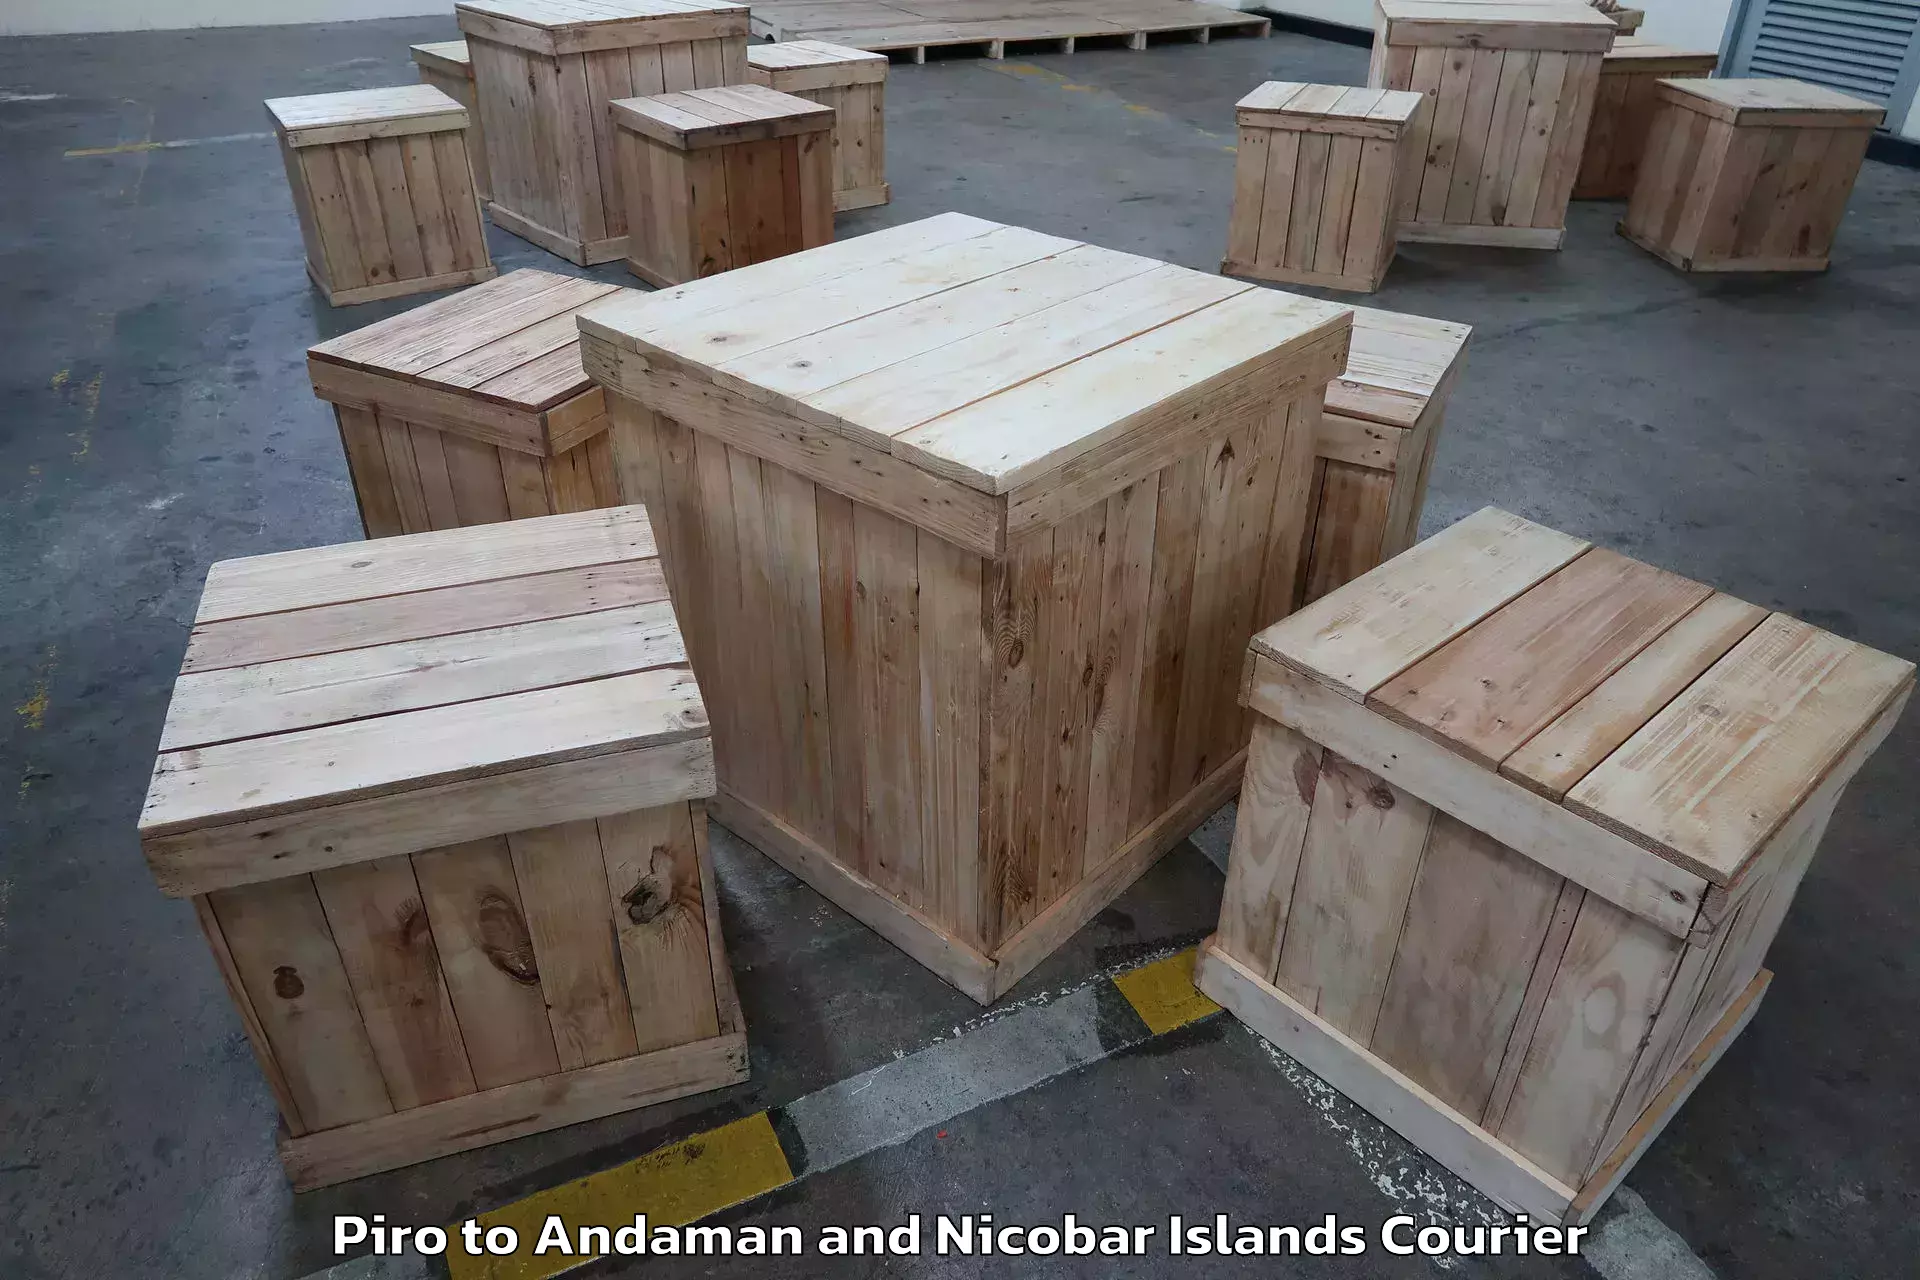 Customized relocation services in Piro to Andaman and Nicobar Islands